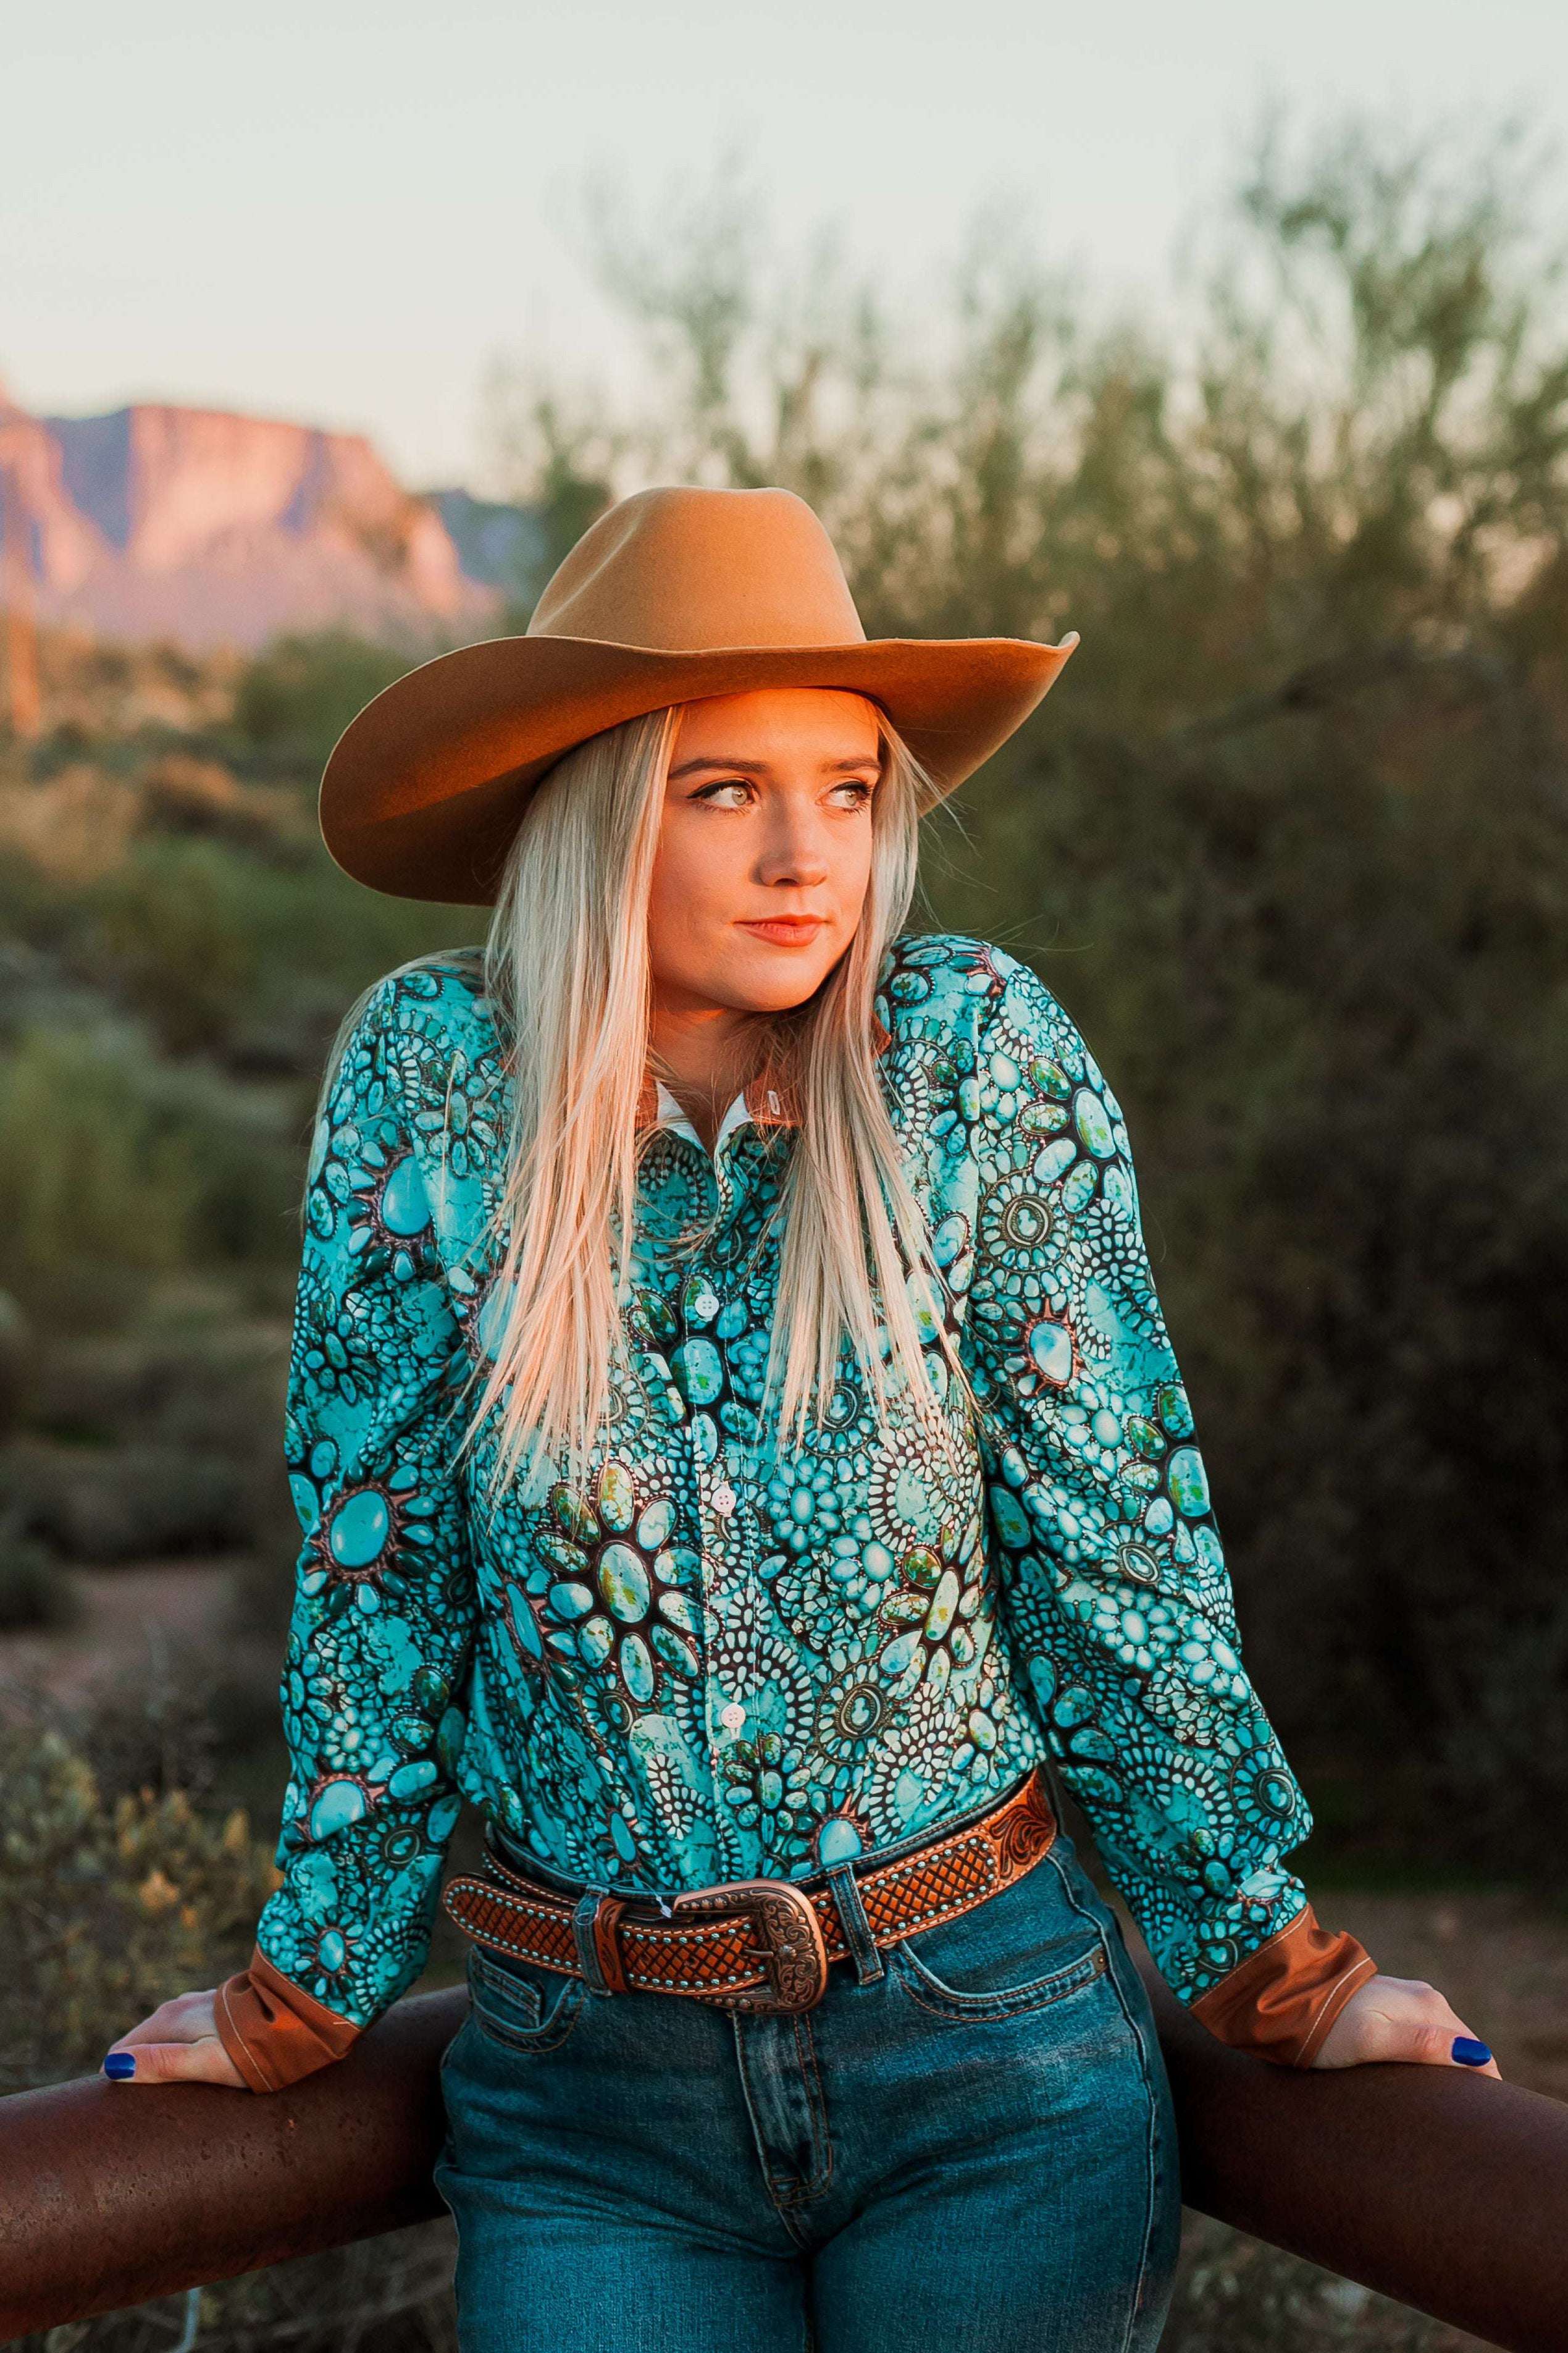 Turquoise Are Cowgirl Diamonds Button Down - The Glamorous Cowgirl